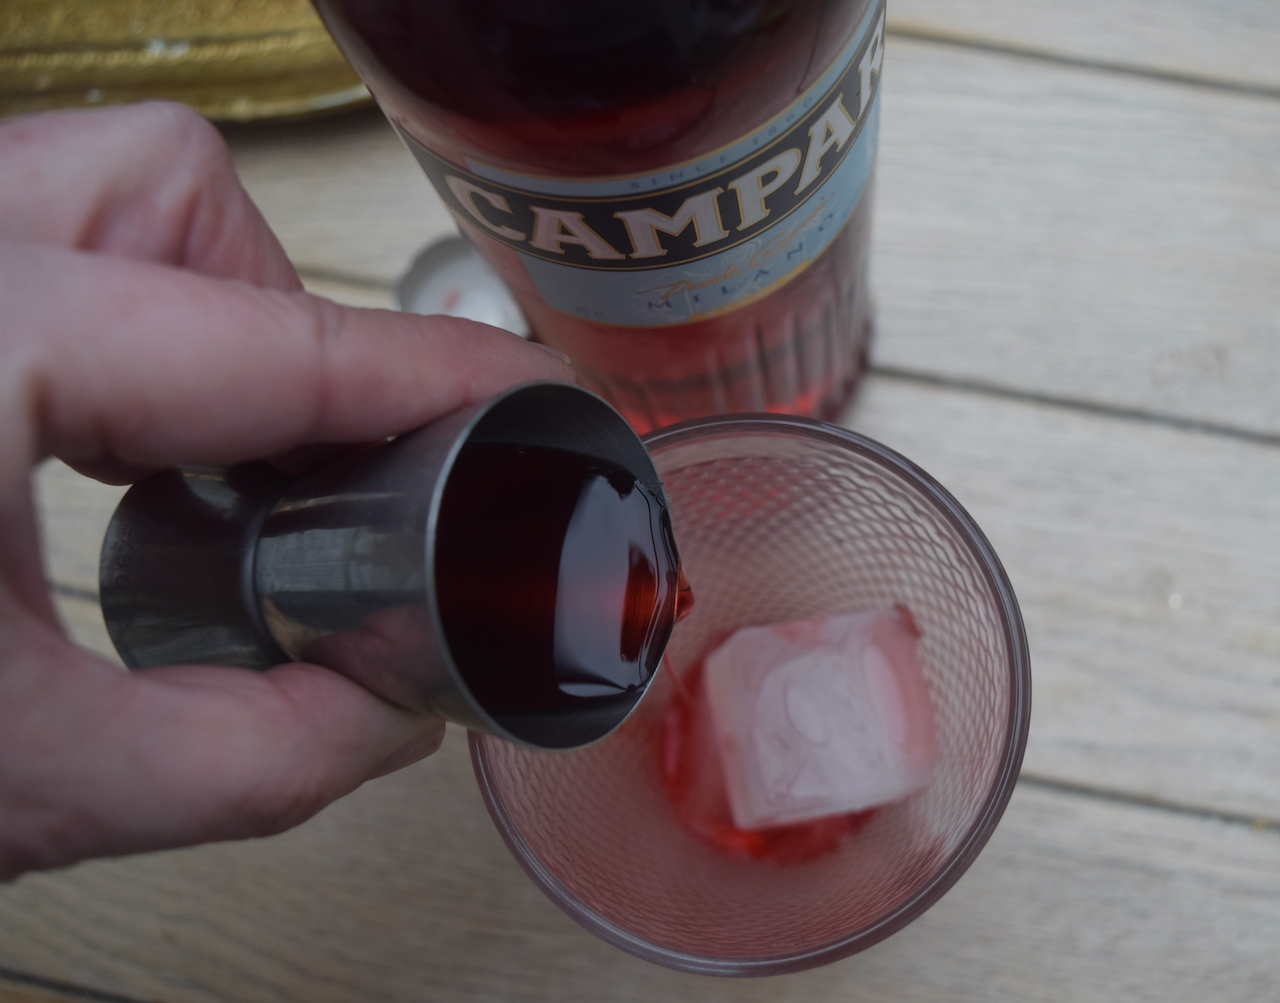 Campari and Blood Orange recipe from Lucy Loves Food Blog